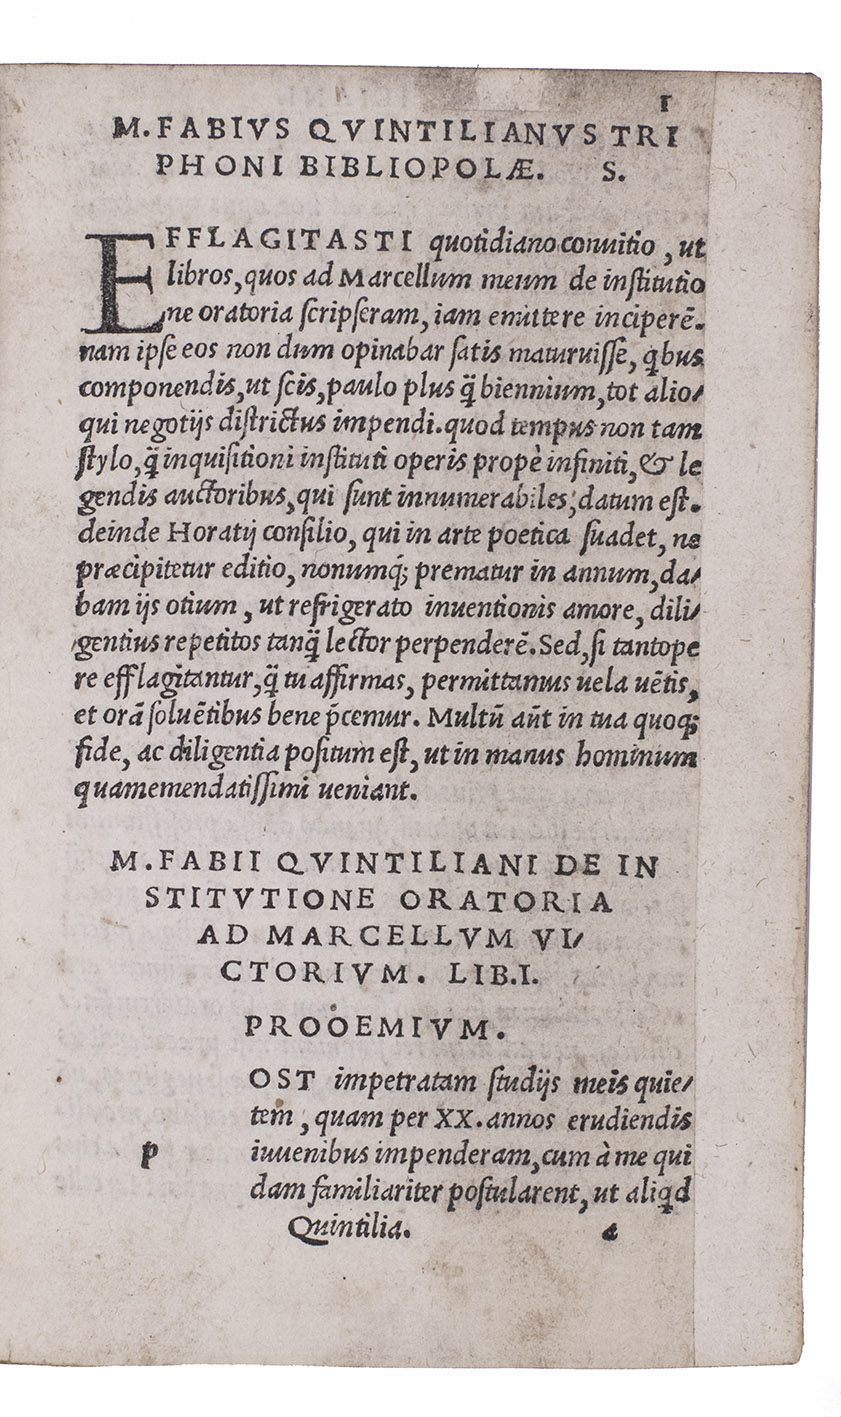 QUINTILIANUS, Marcus Fabius. - [De institutione oratoria]. (Colophon: Florence, Filippo I Giunta, October 1515). Small 8vo (14.5 x 10 cm). With a title-page containing only the author's name, but with the title in the heading to liber I, and Giunti's woodcut device on the verso of the otherwise blank final leaf. Set entirely in an Aldine-style italic (with upright capitals). Vellum (ca. 1850?).